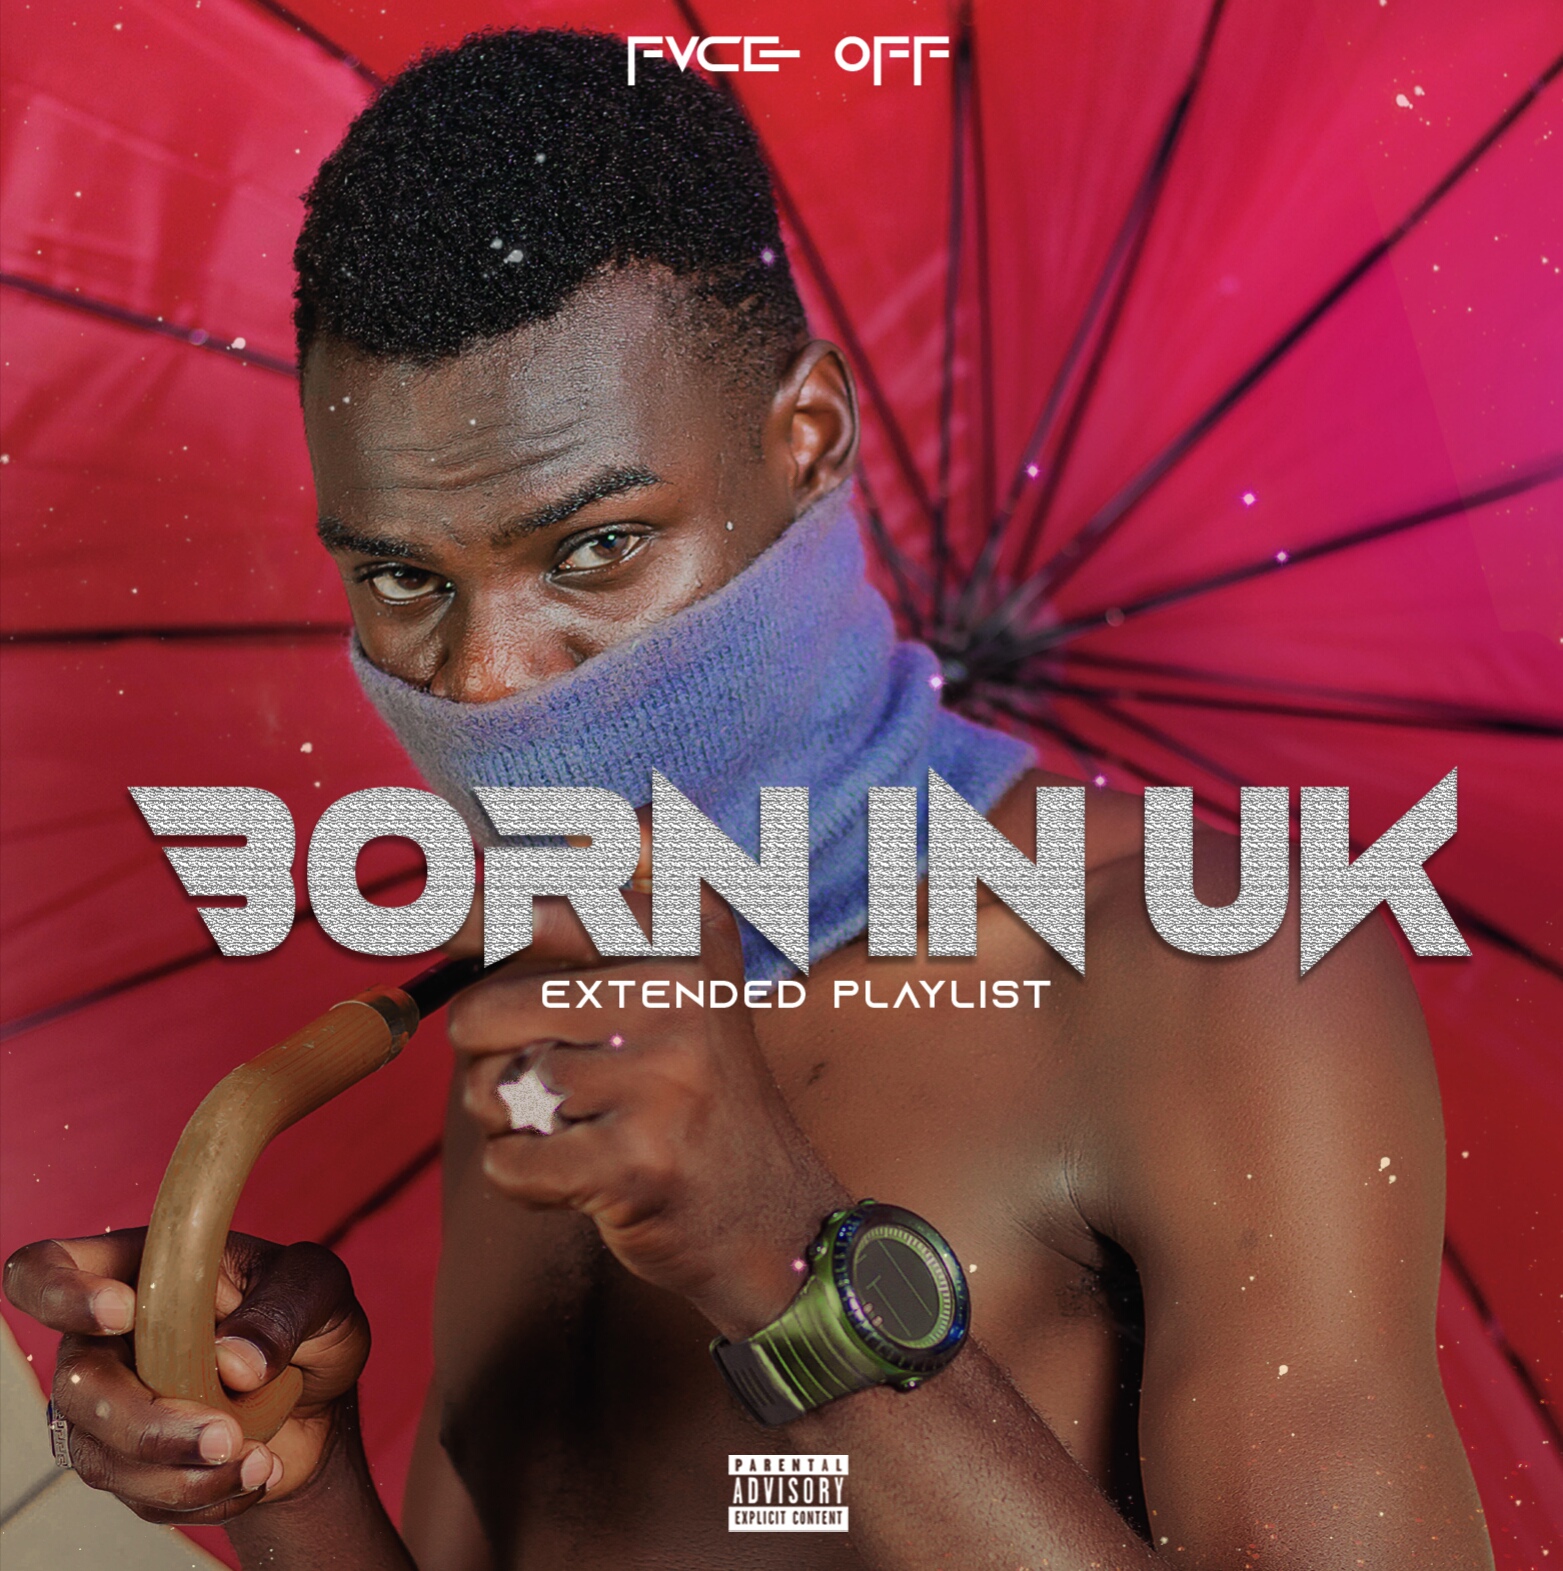 Born in Uk by Fvce off | Album